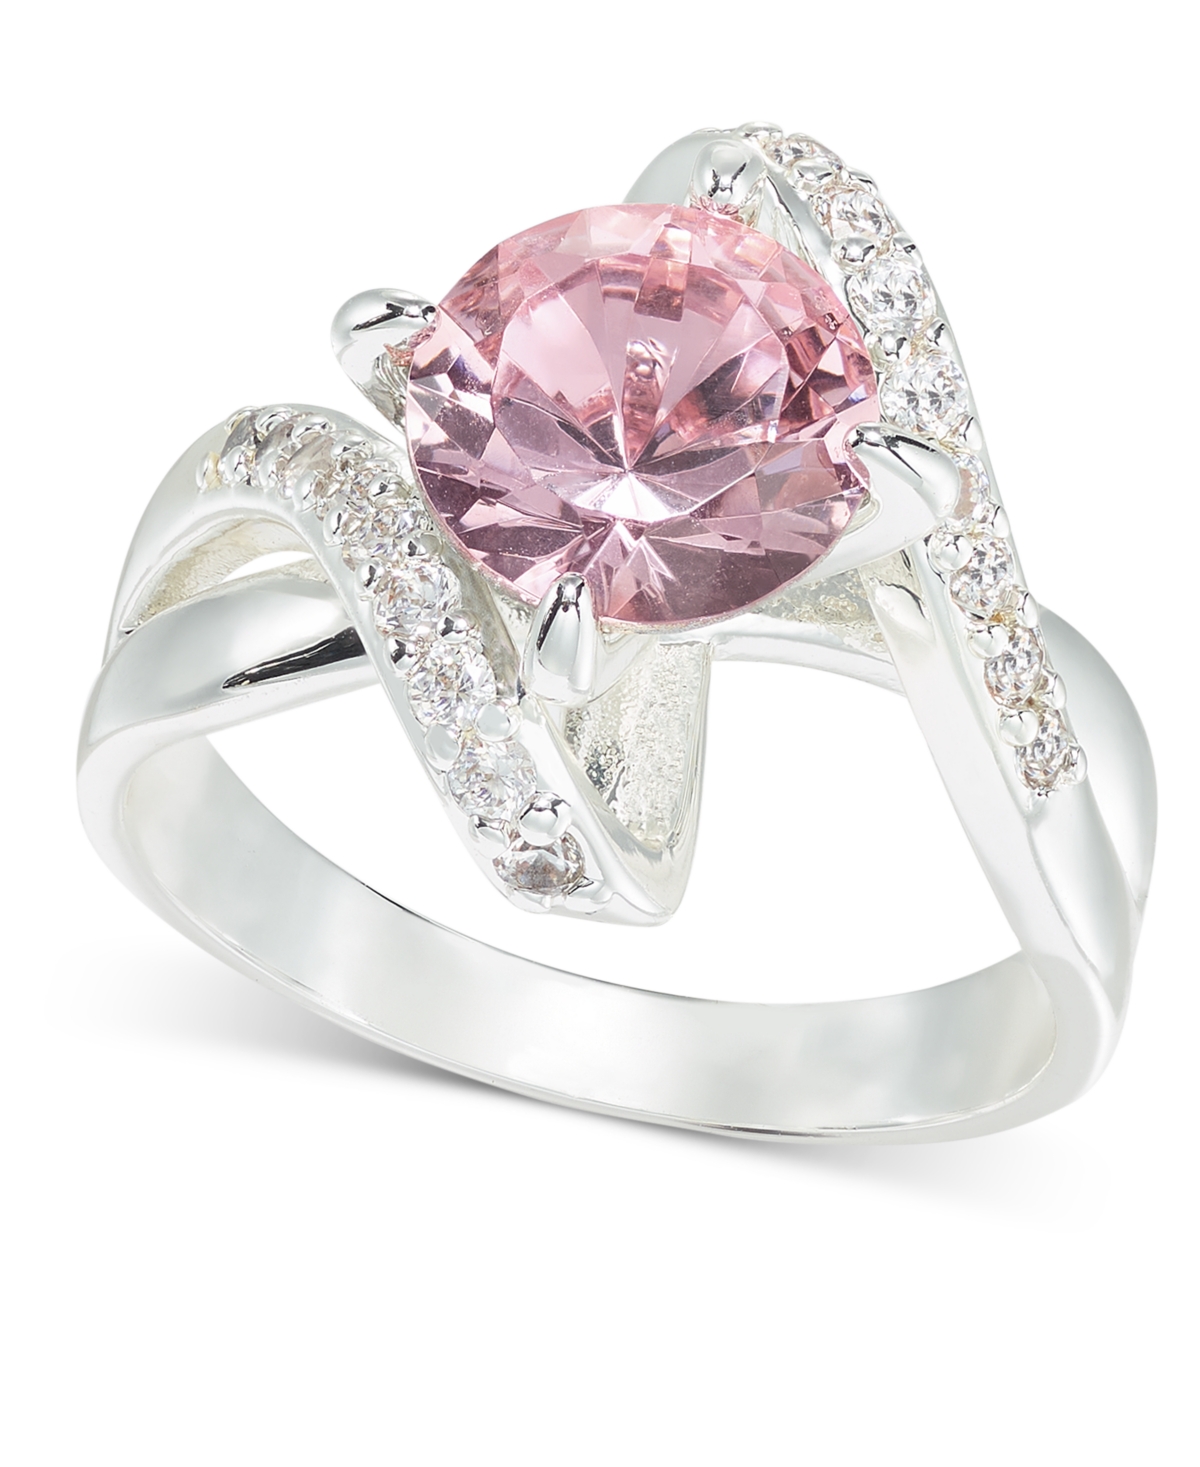 Silver-Tone Pave & Pink Crystal Bypass Ring, Created for Macy's - Silver